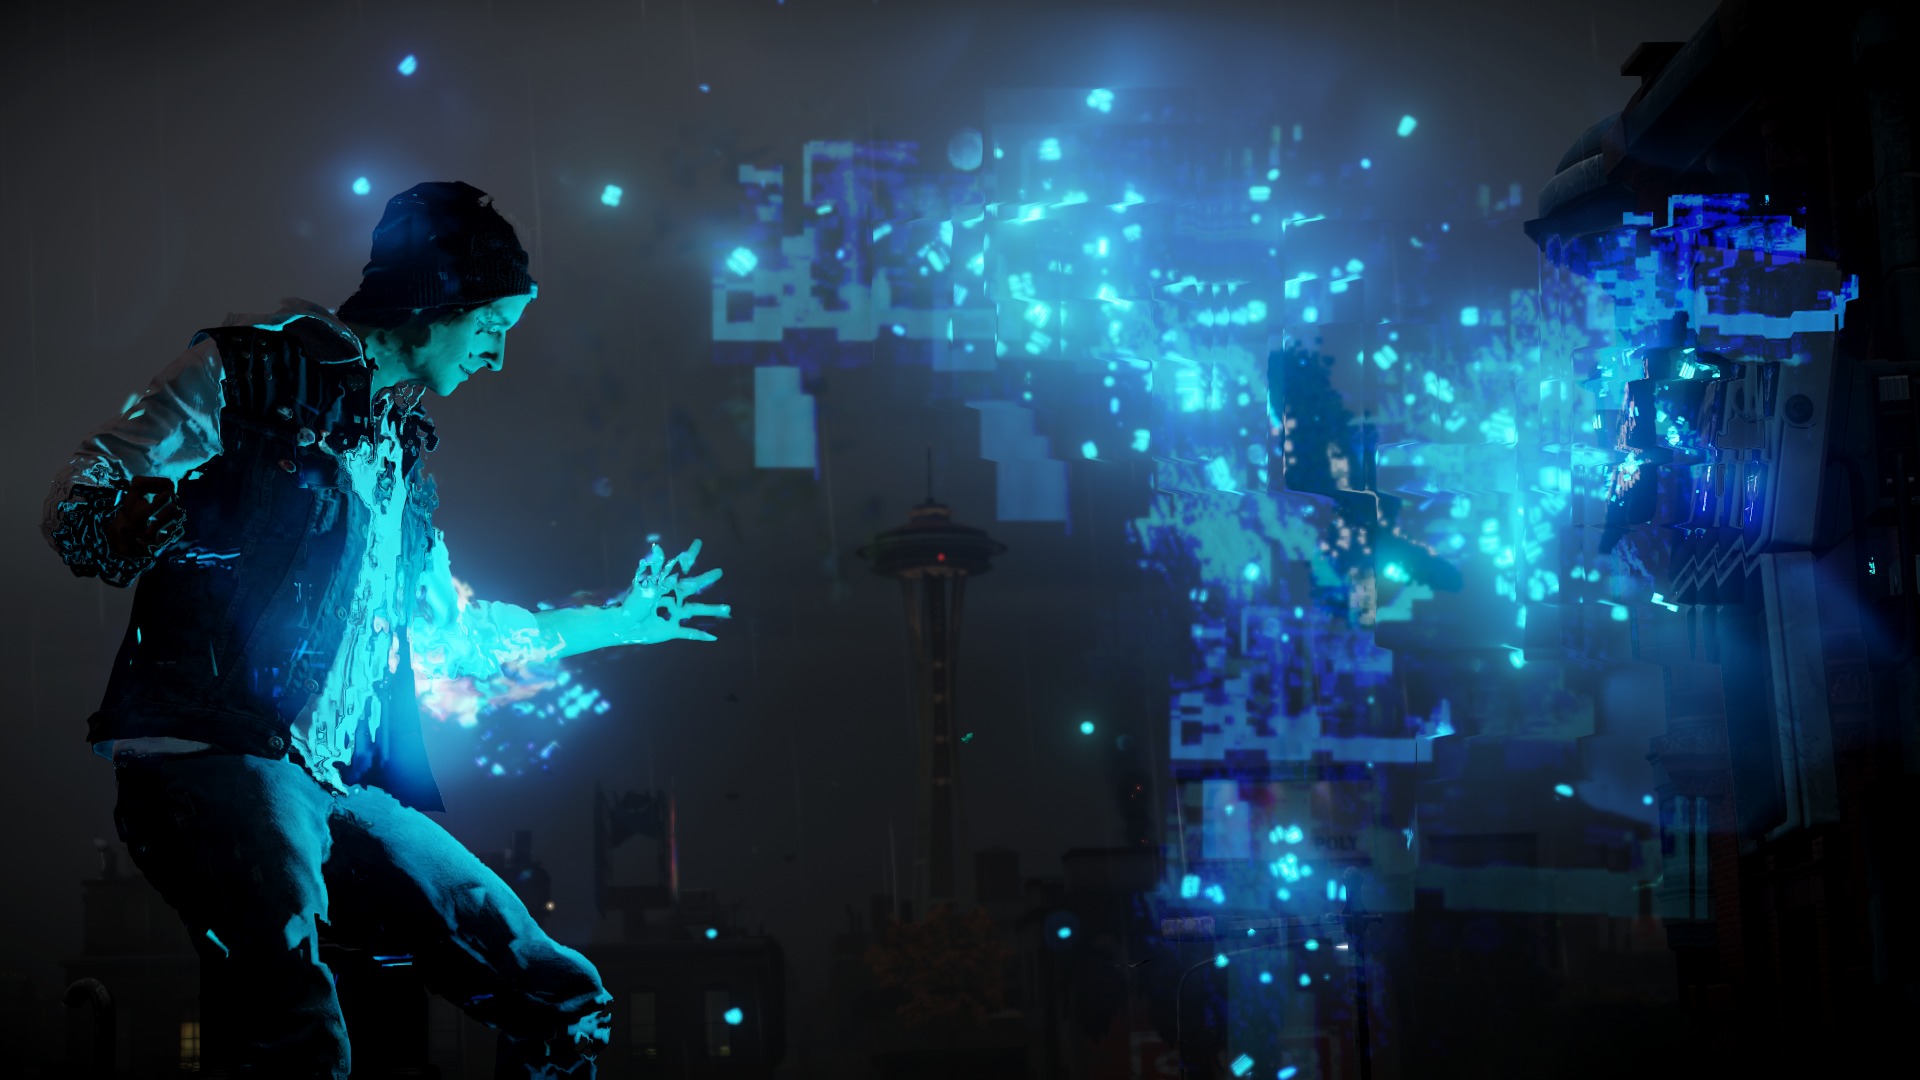 infamous second son video powers